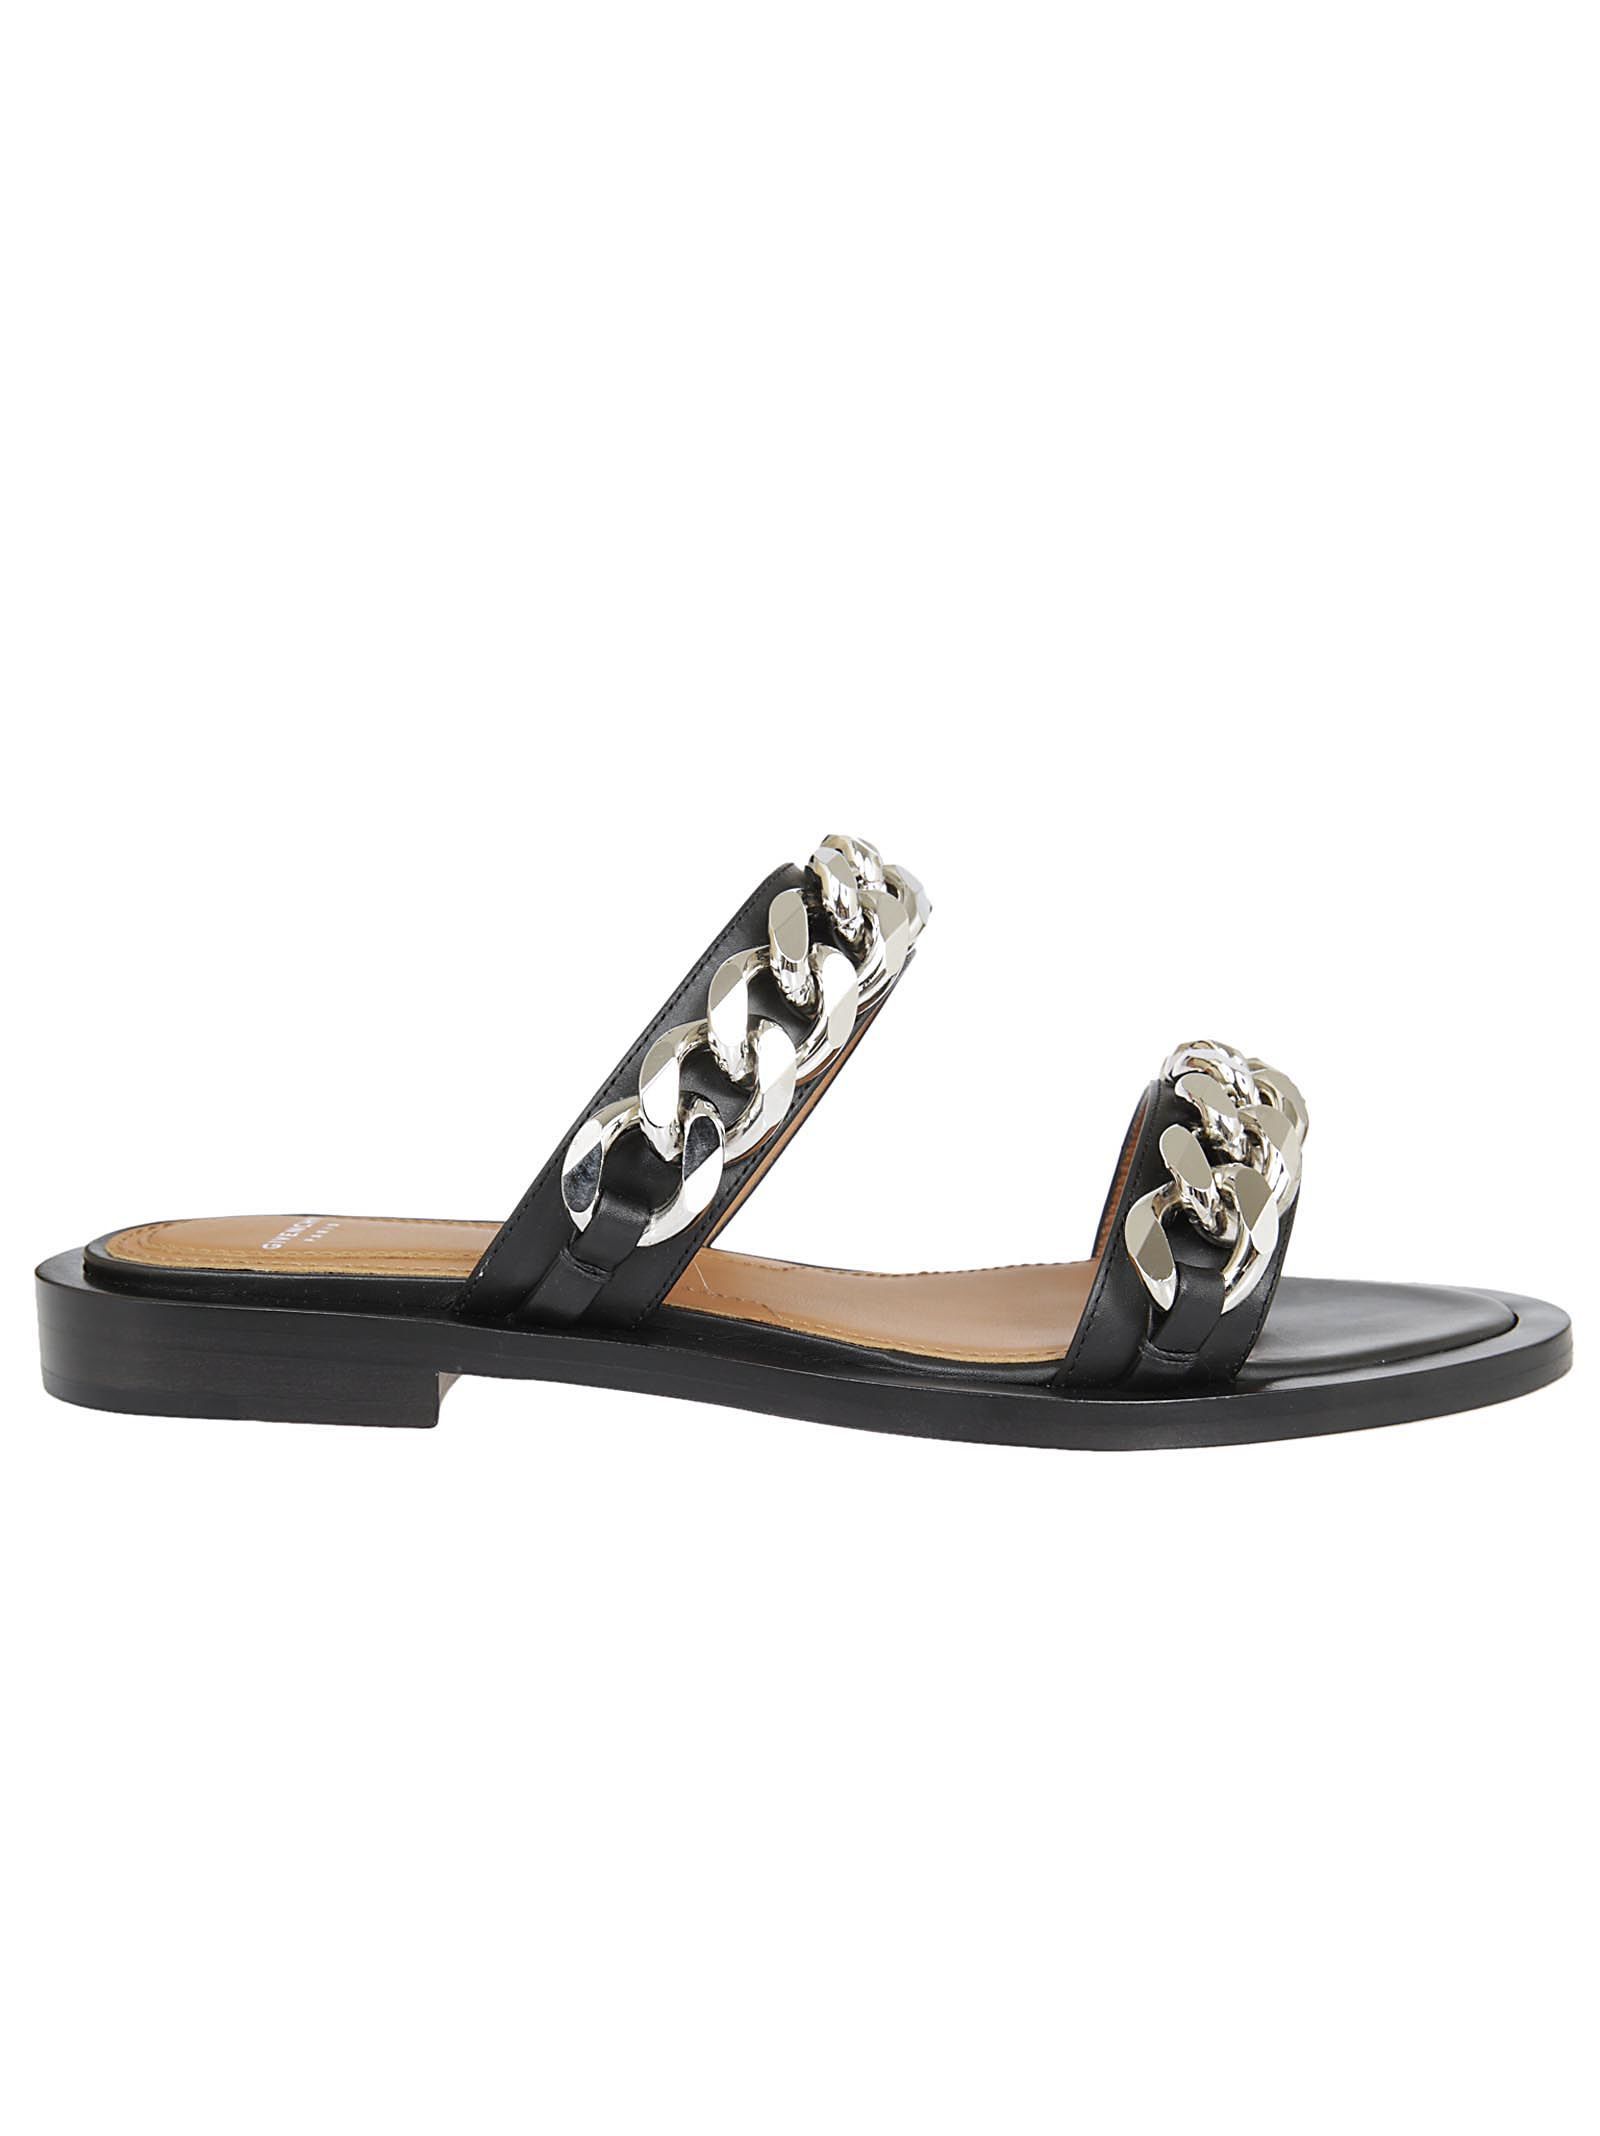 Givenchy Chain Flat Sandals | Italist.com US